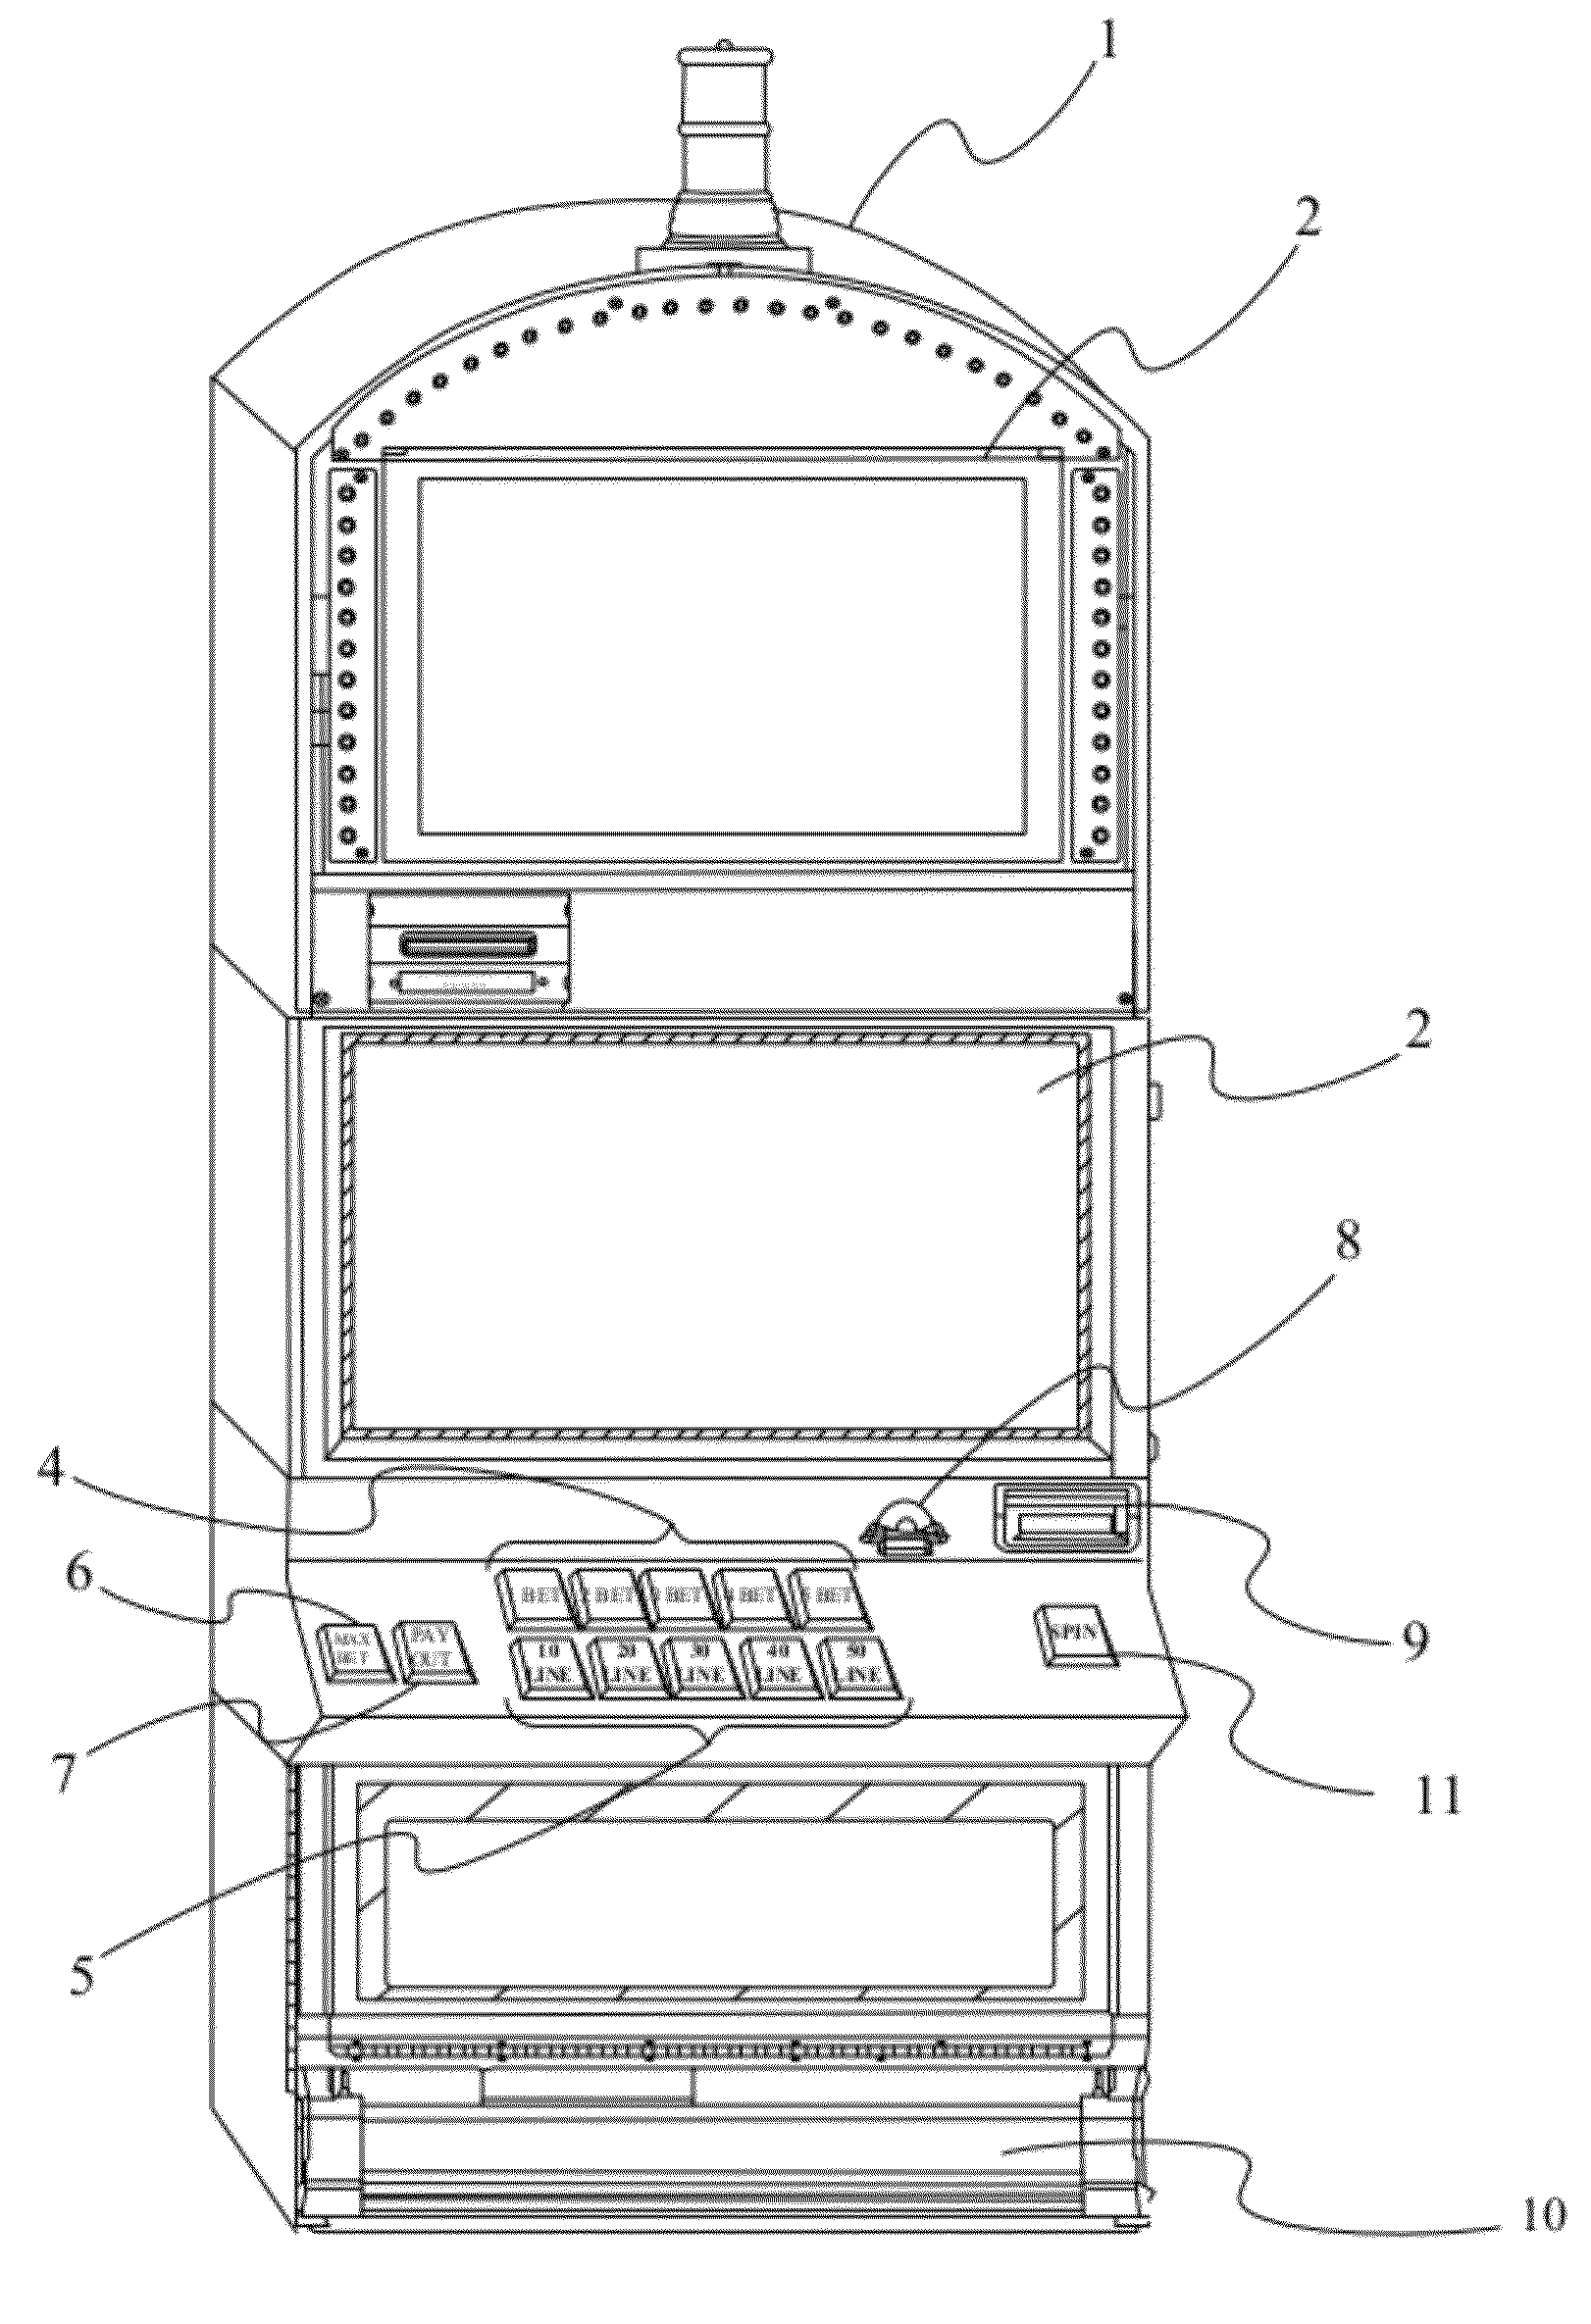 Gaming machine and system having secondary game